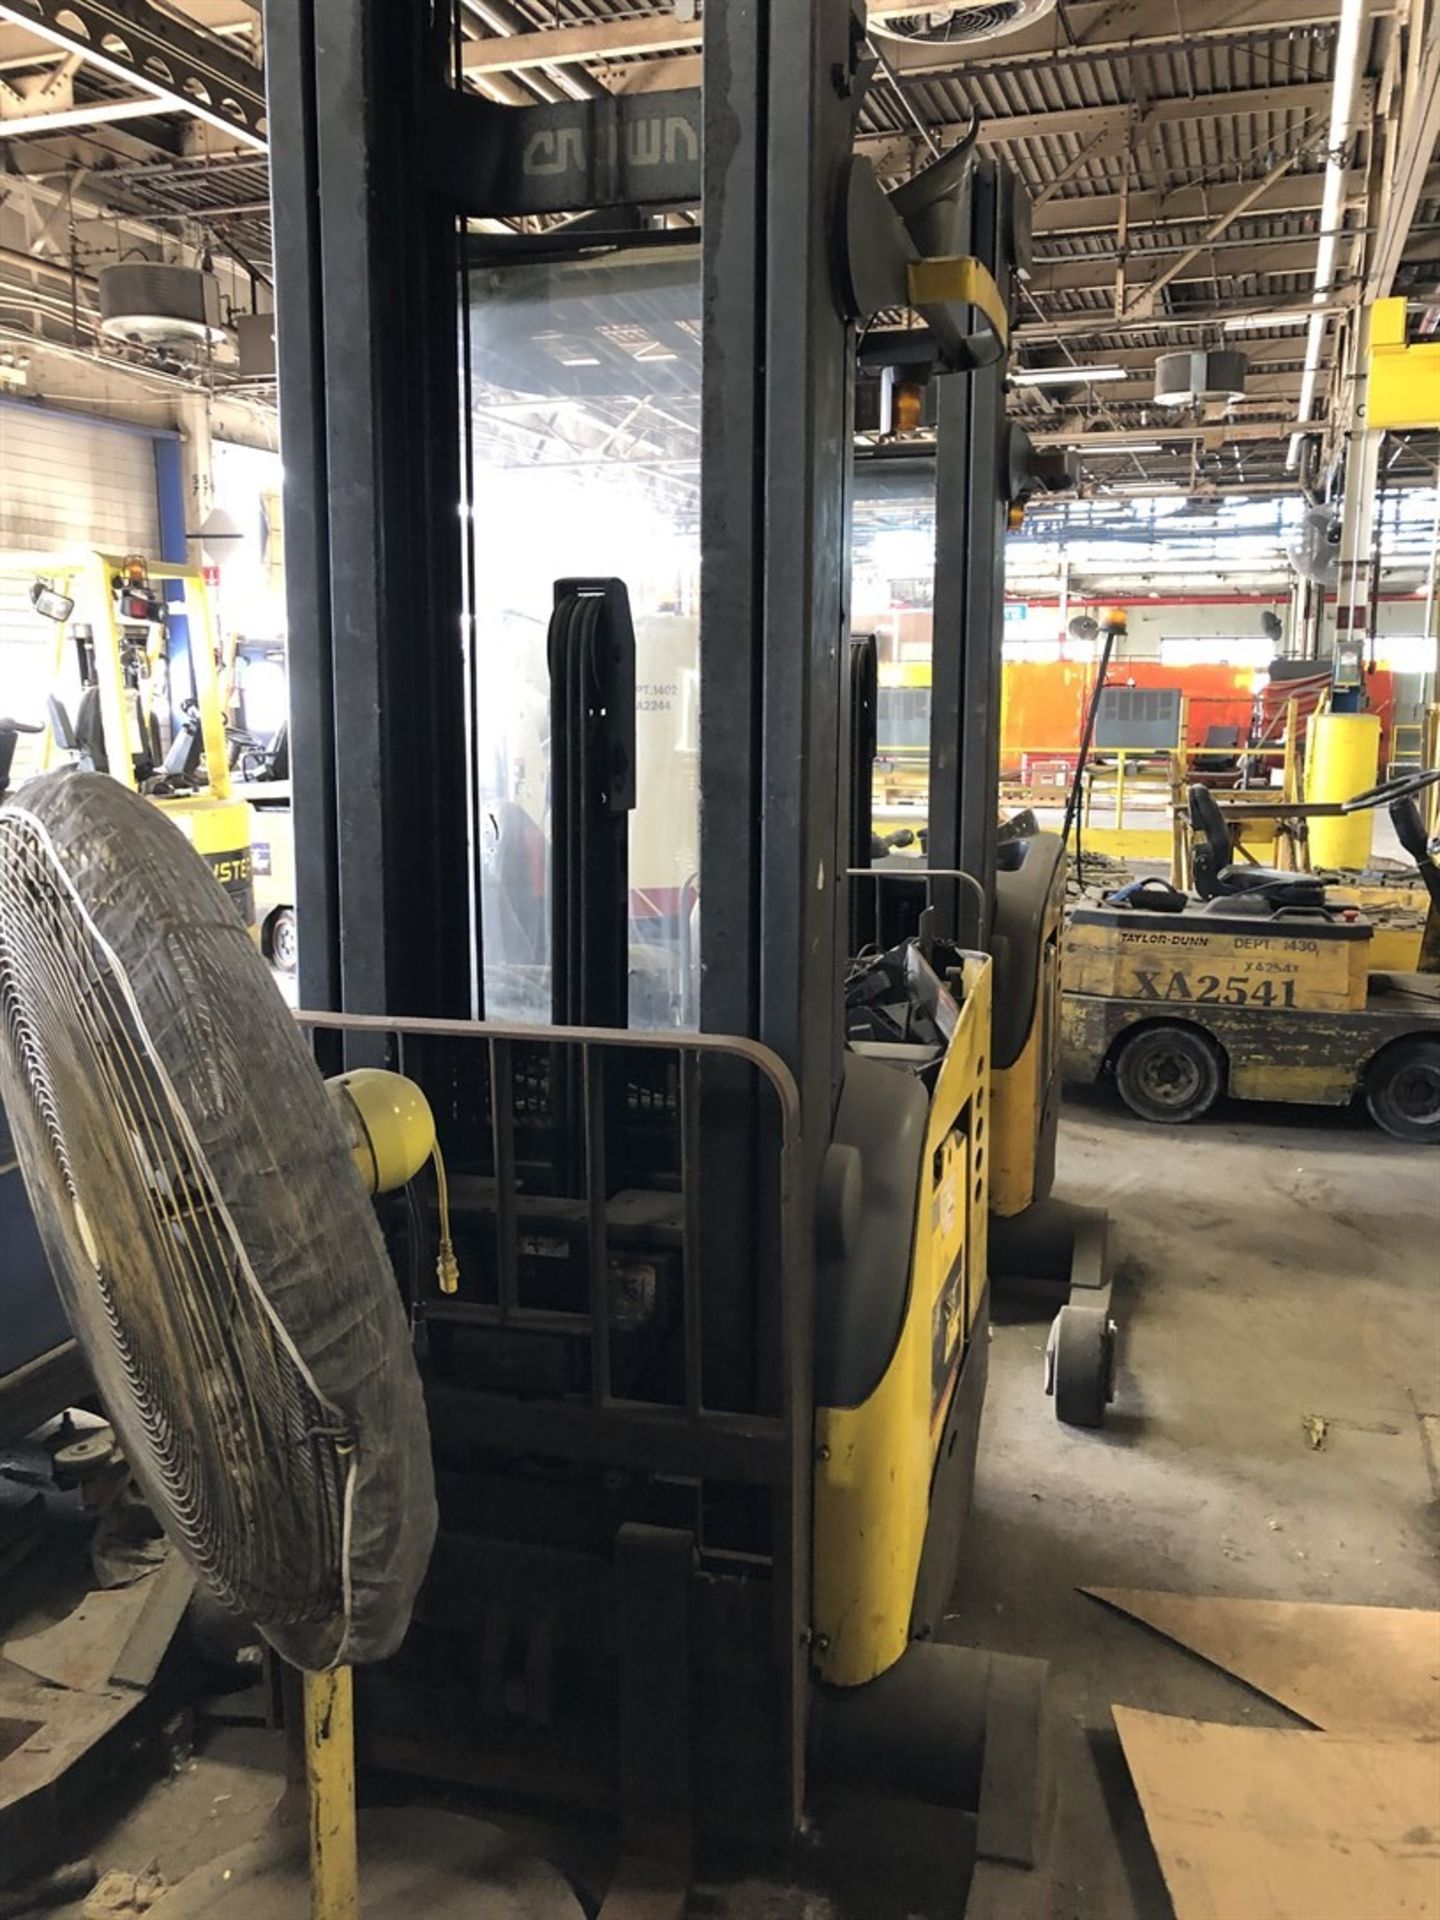 CROWN RR5000 Series Electric Reach Truck, Capacity na, s/n na, (Not Running) - Image 2 of 2